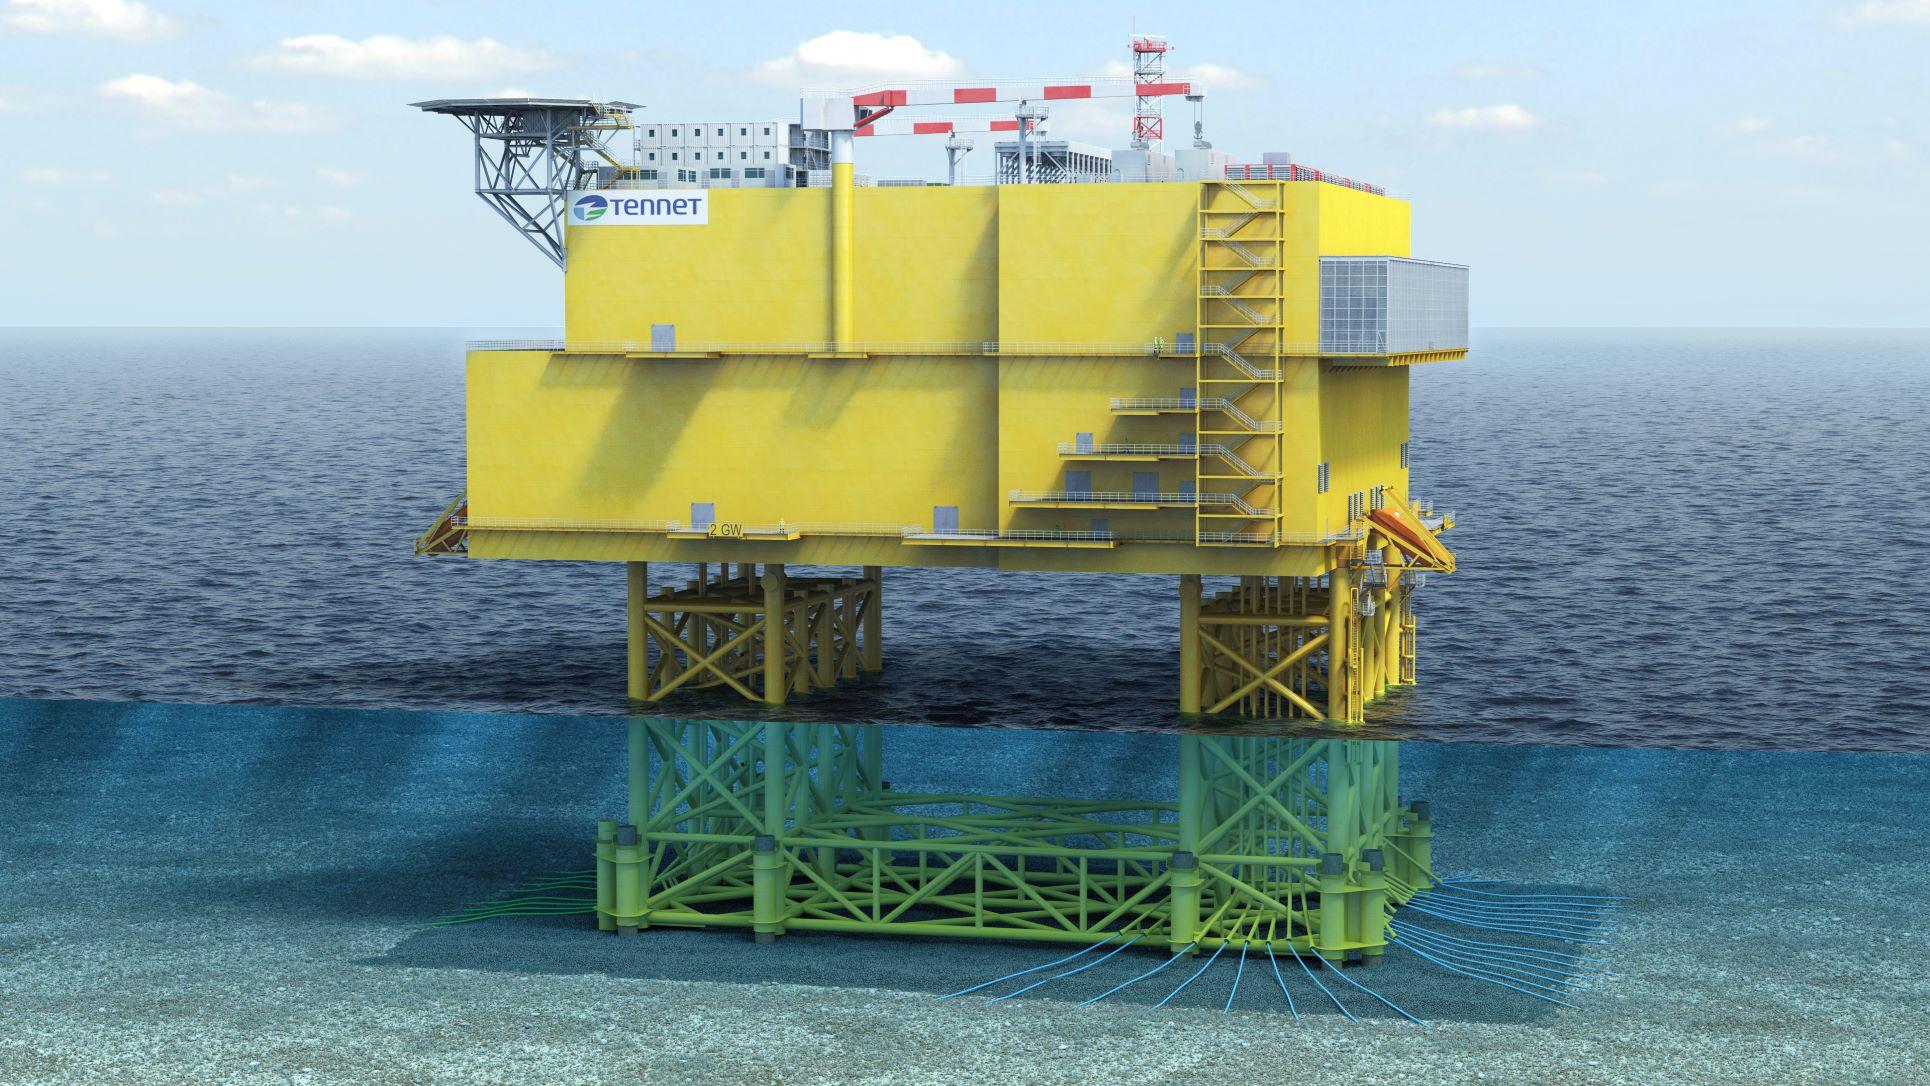 TenneT Awards EUR 23 Billion in Contracts for Offshore Wind Grid Connections in North Sea